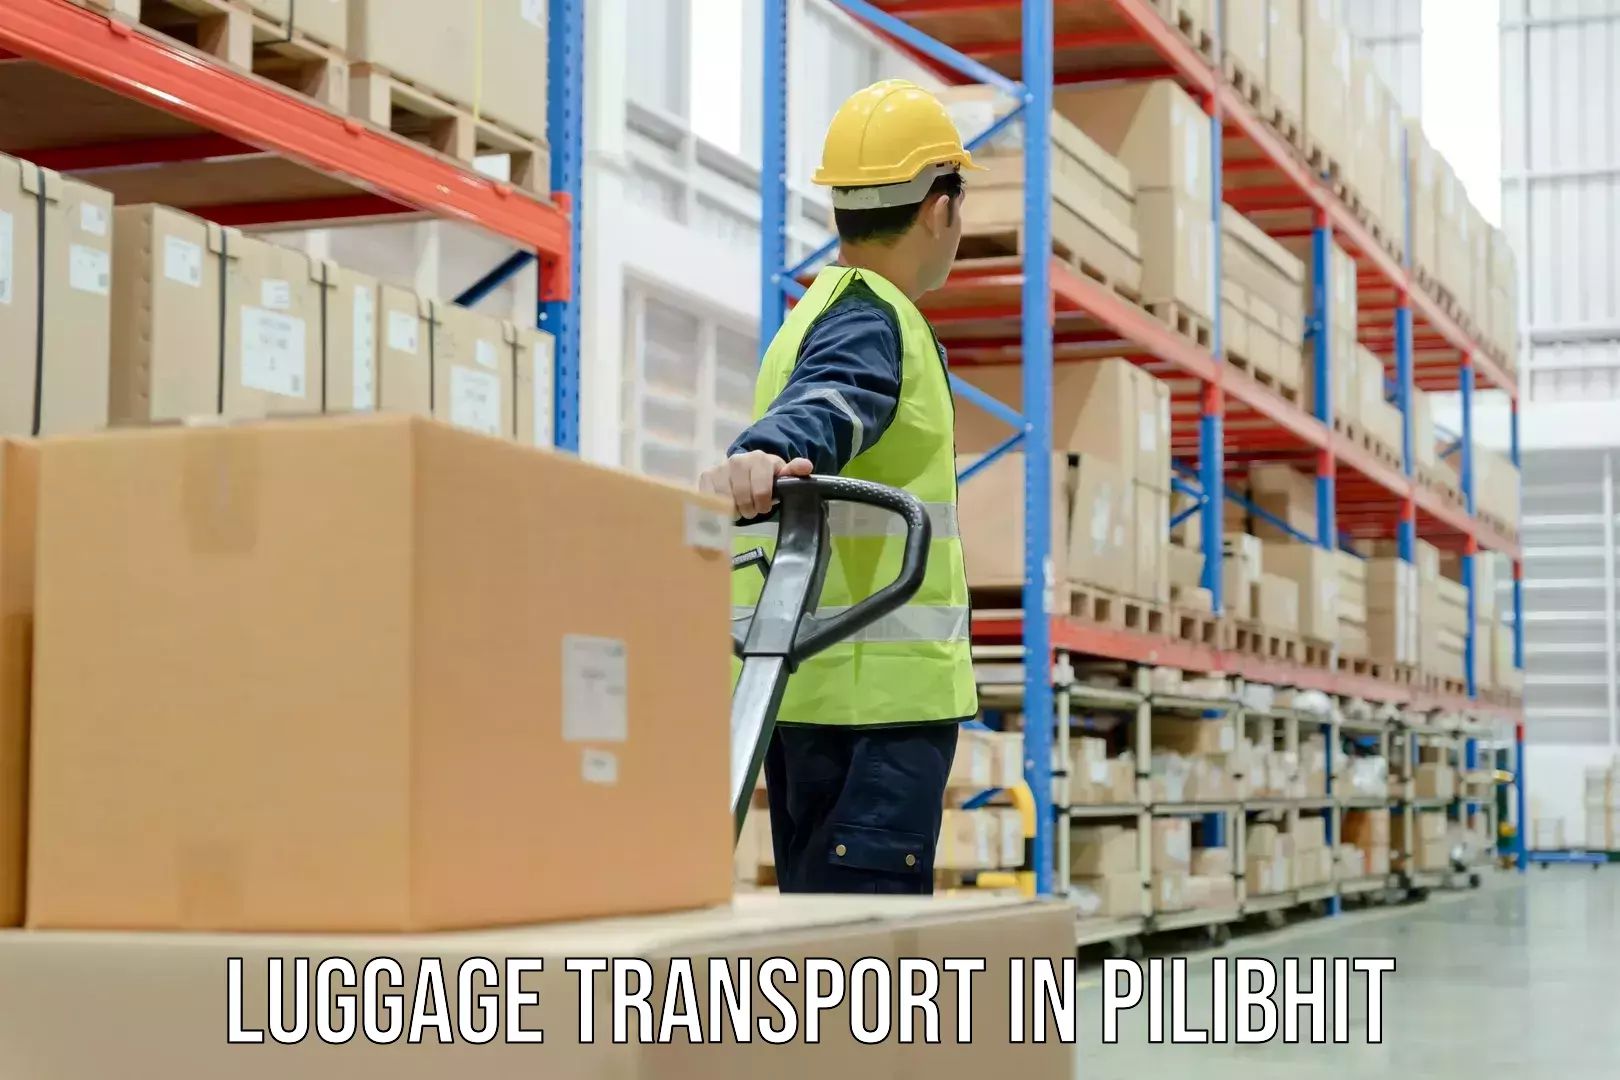 Luggage transport guidelines in Pilibhit